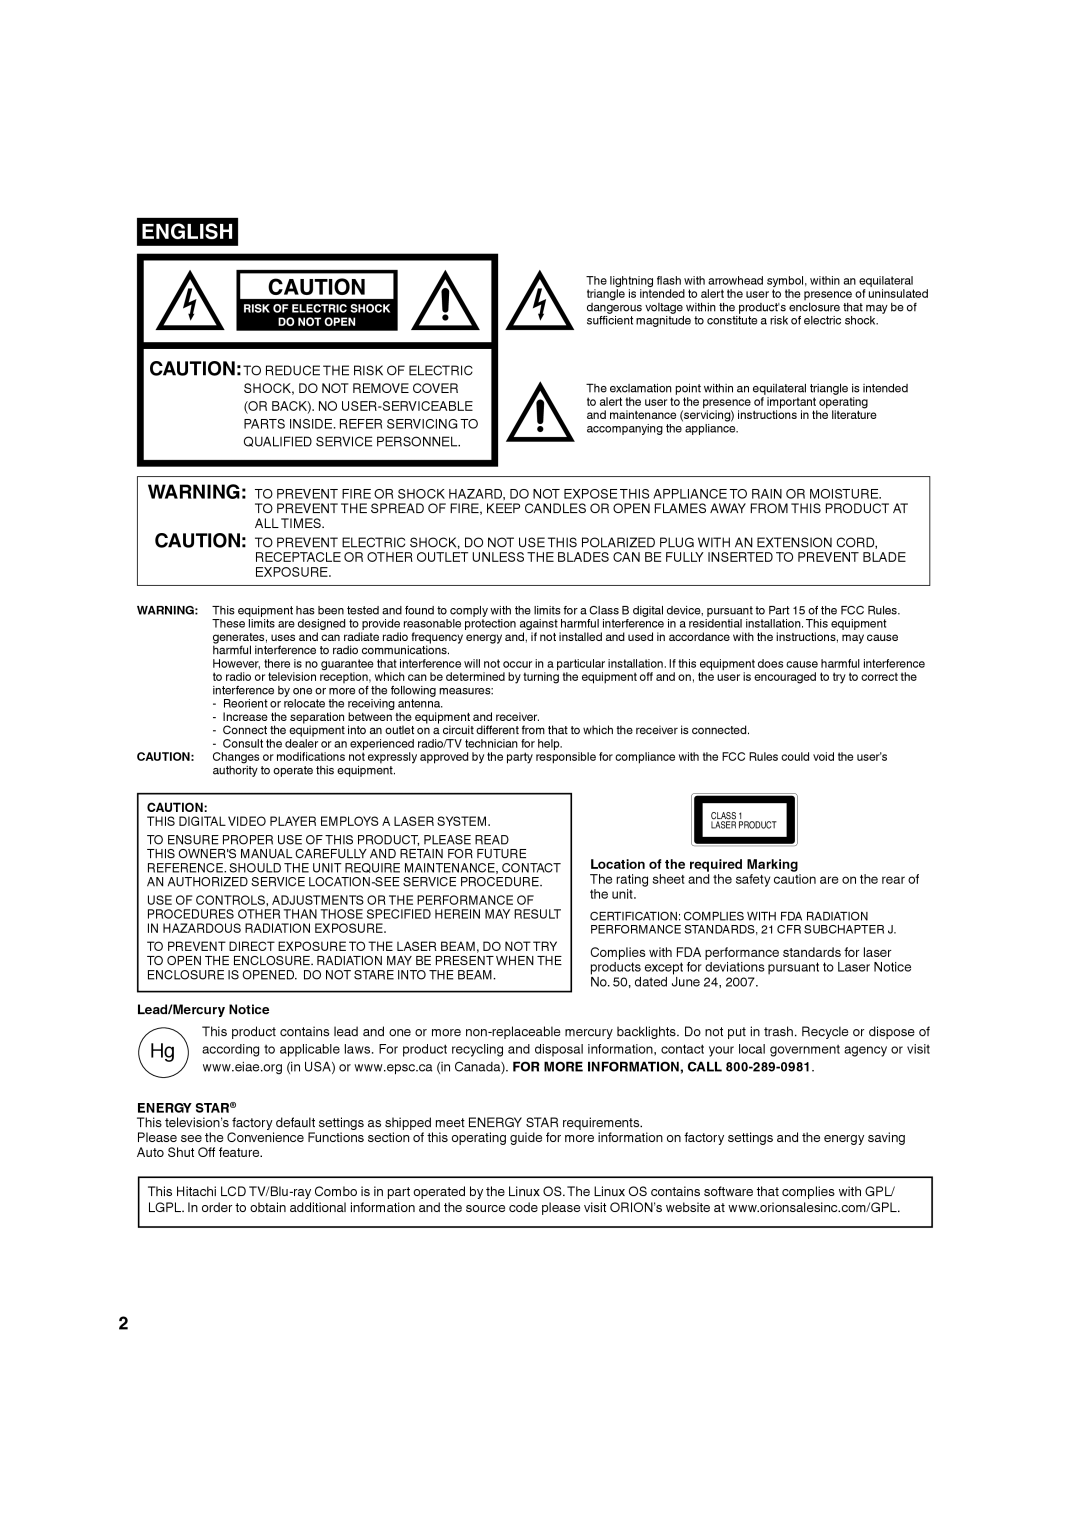 Hitachi L32BD304 manual Lead/Mercury Notice, Location of the required Marking, Energy Star 